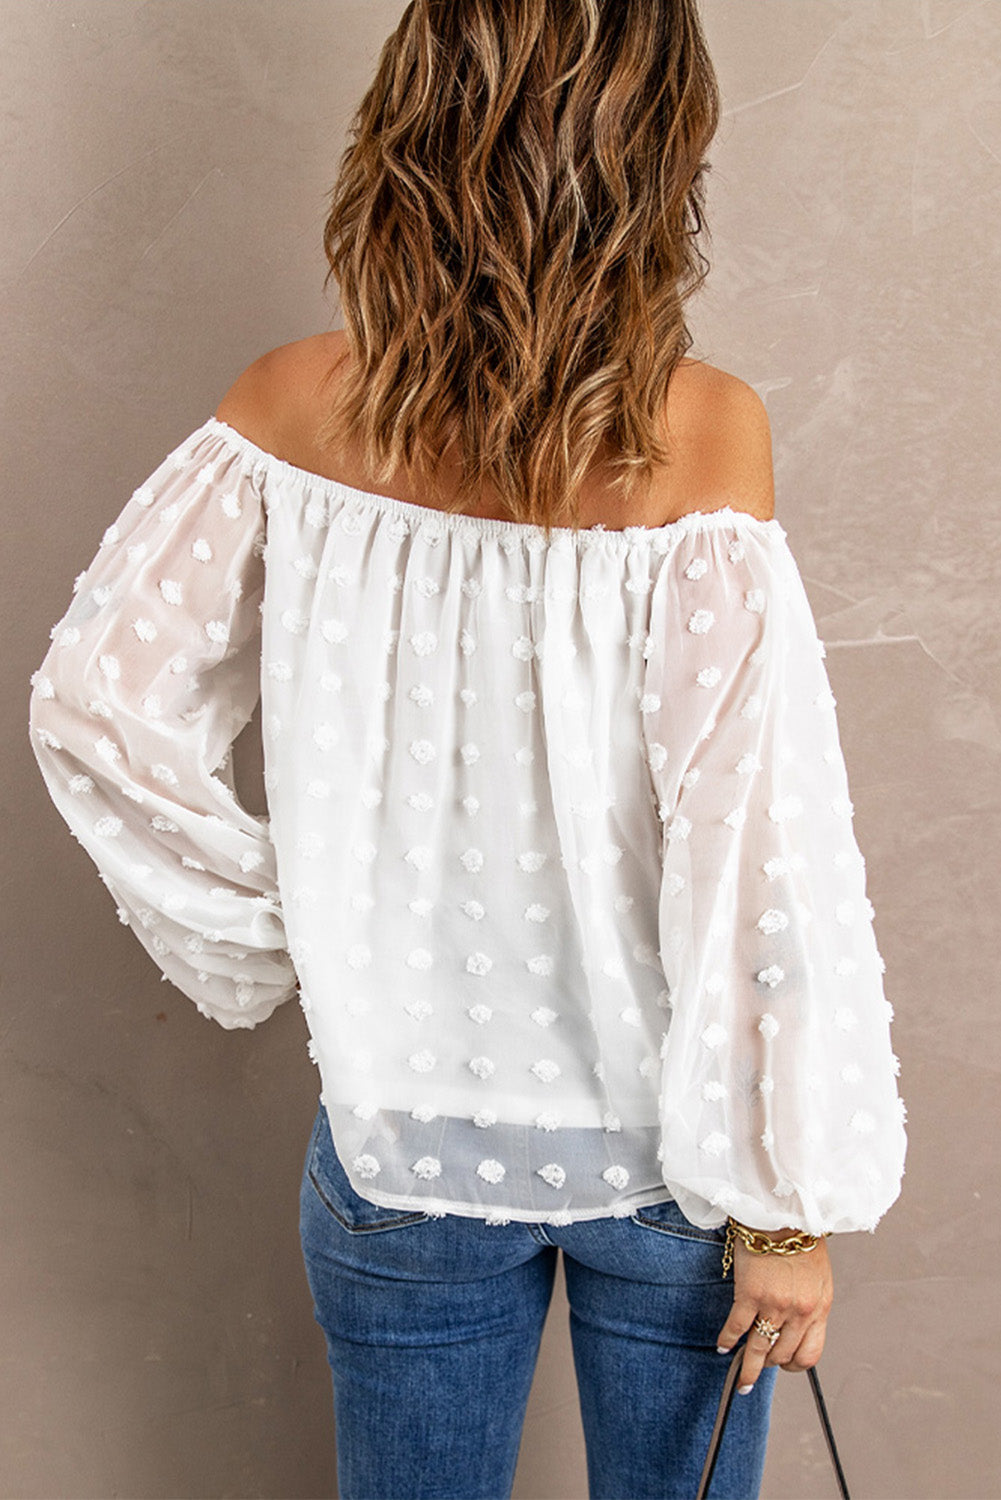 Blouse Blanche Epaules Denudees A Pois Suisses Manches Longues